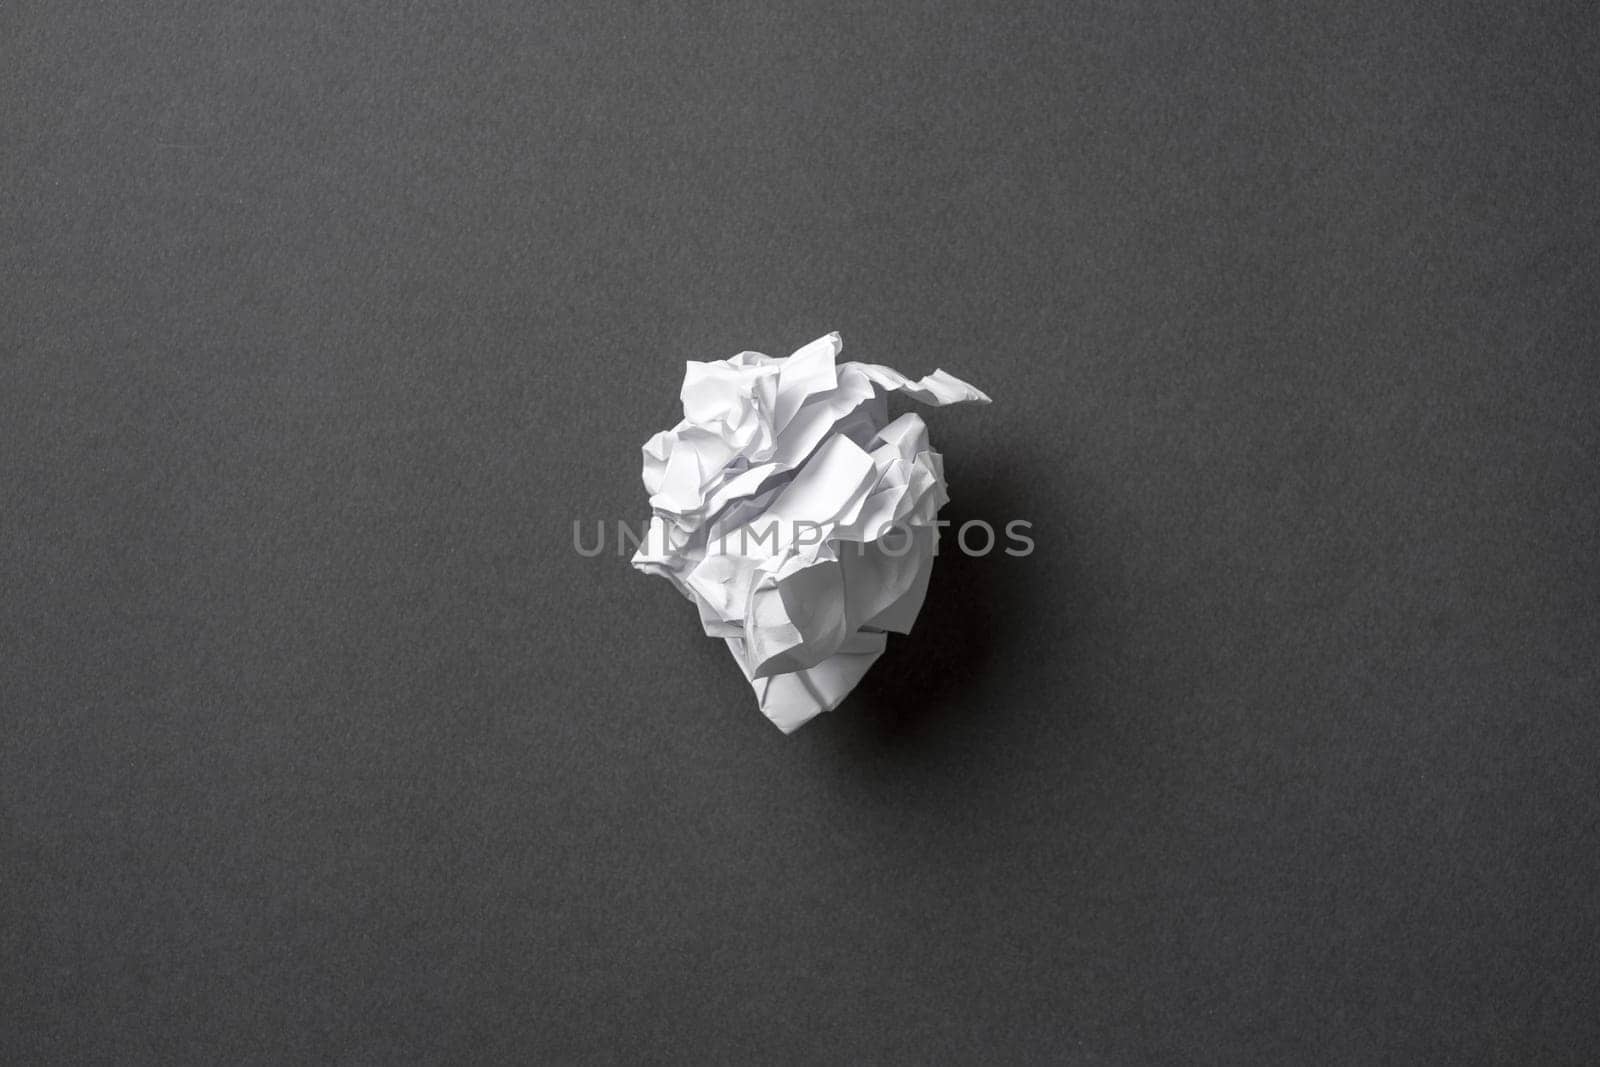 White paper crumpled into a ball on a dark gray background